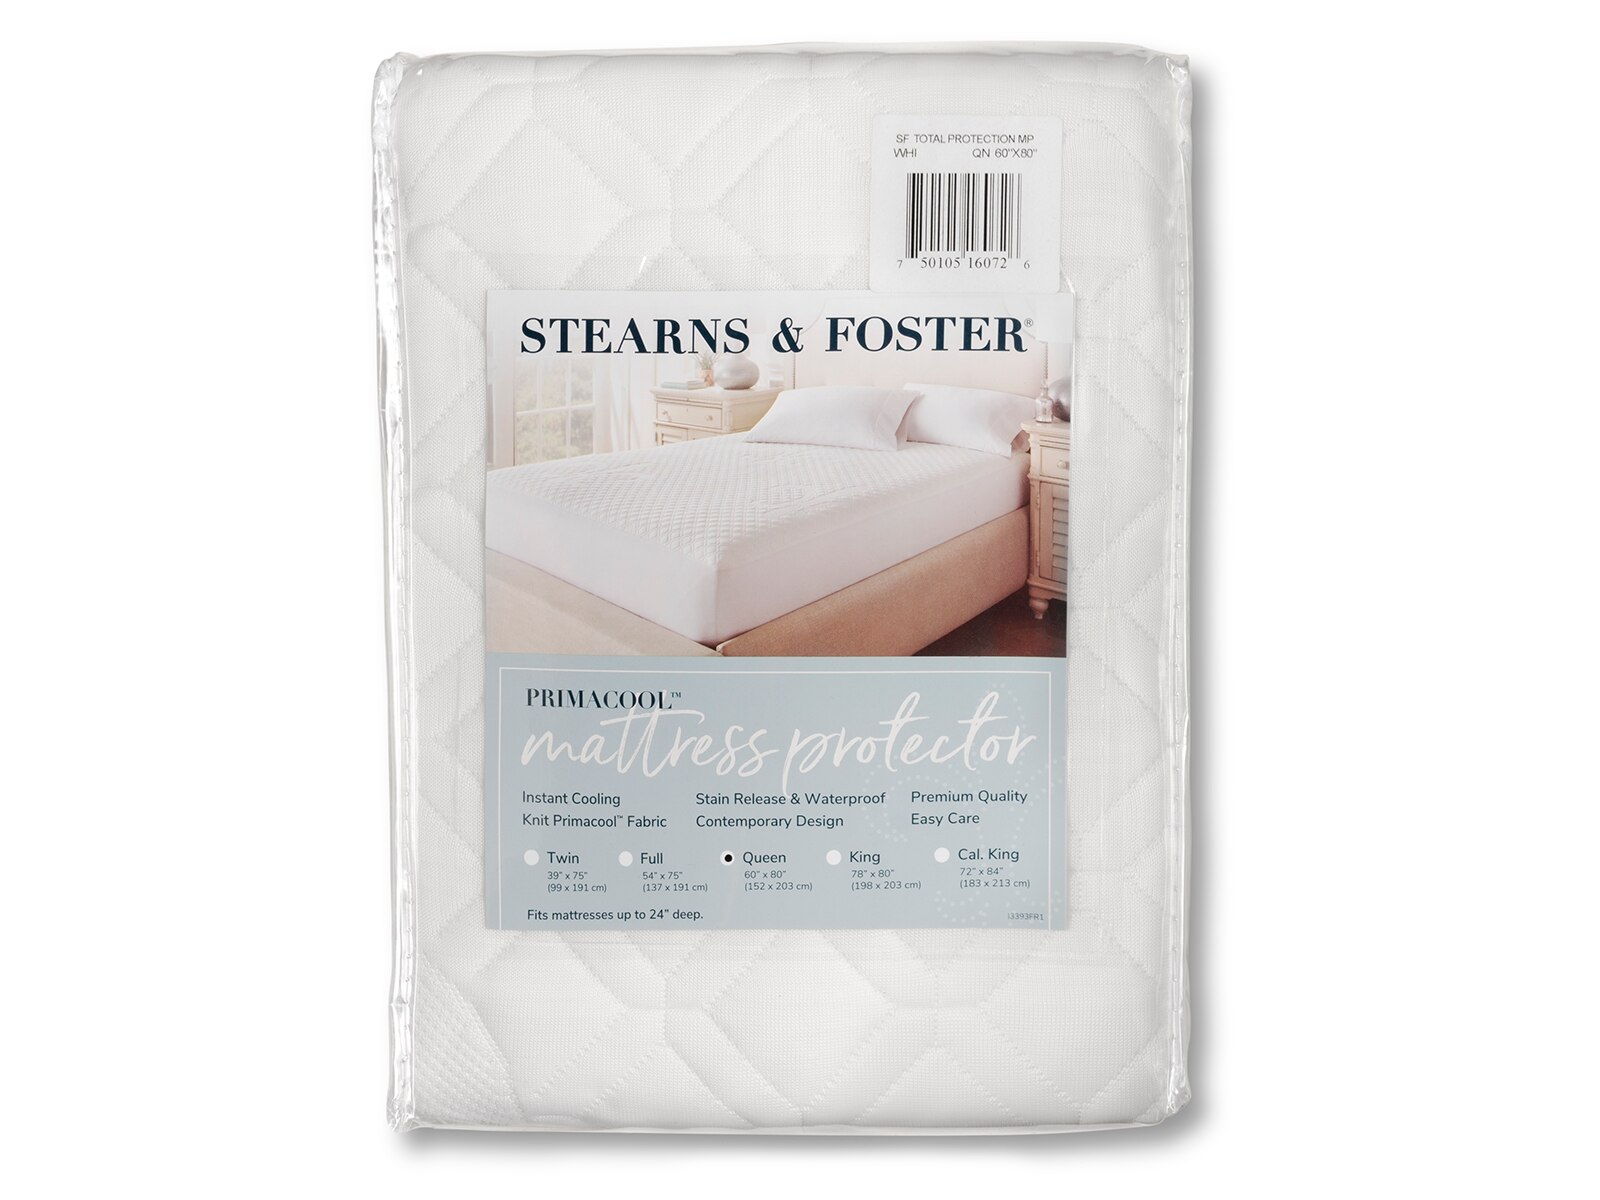 stearns & foster waterproof cooling mattress protector